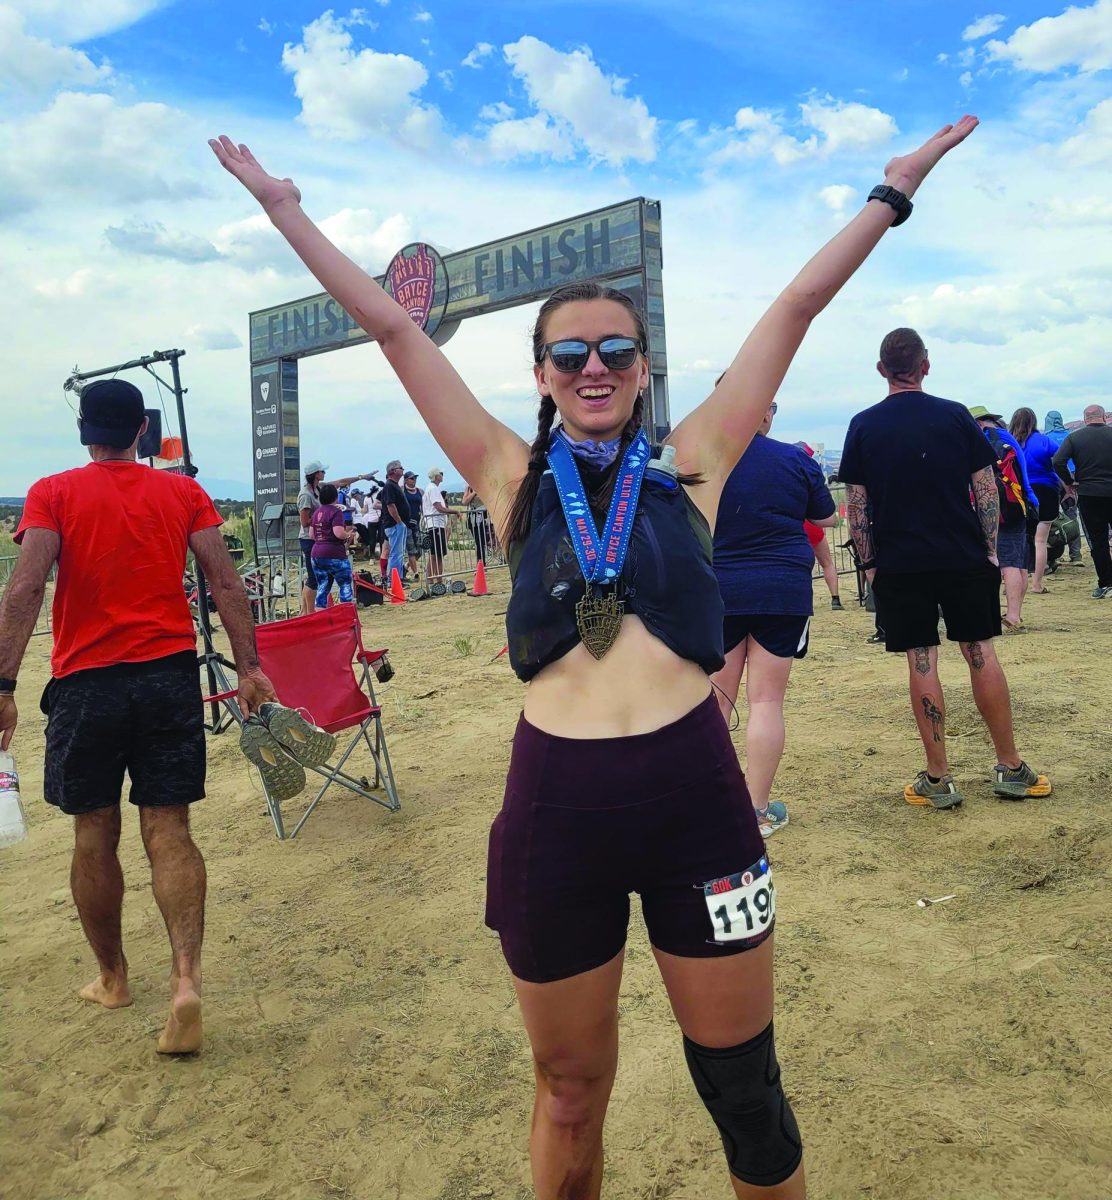 A run to remember… Finishing her 60k race, ultramarathon runner Samantha Luchansky celebrates her accomplishment. The run took place at Bryce Canyon in Utah on May 29, 2021. 